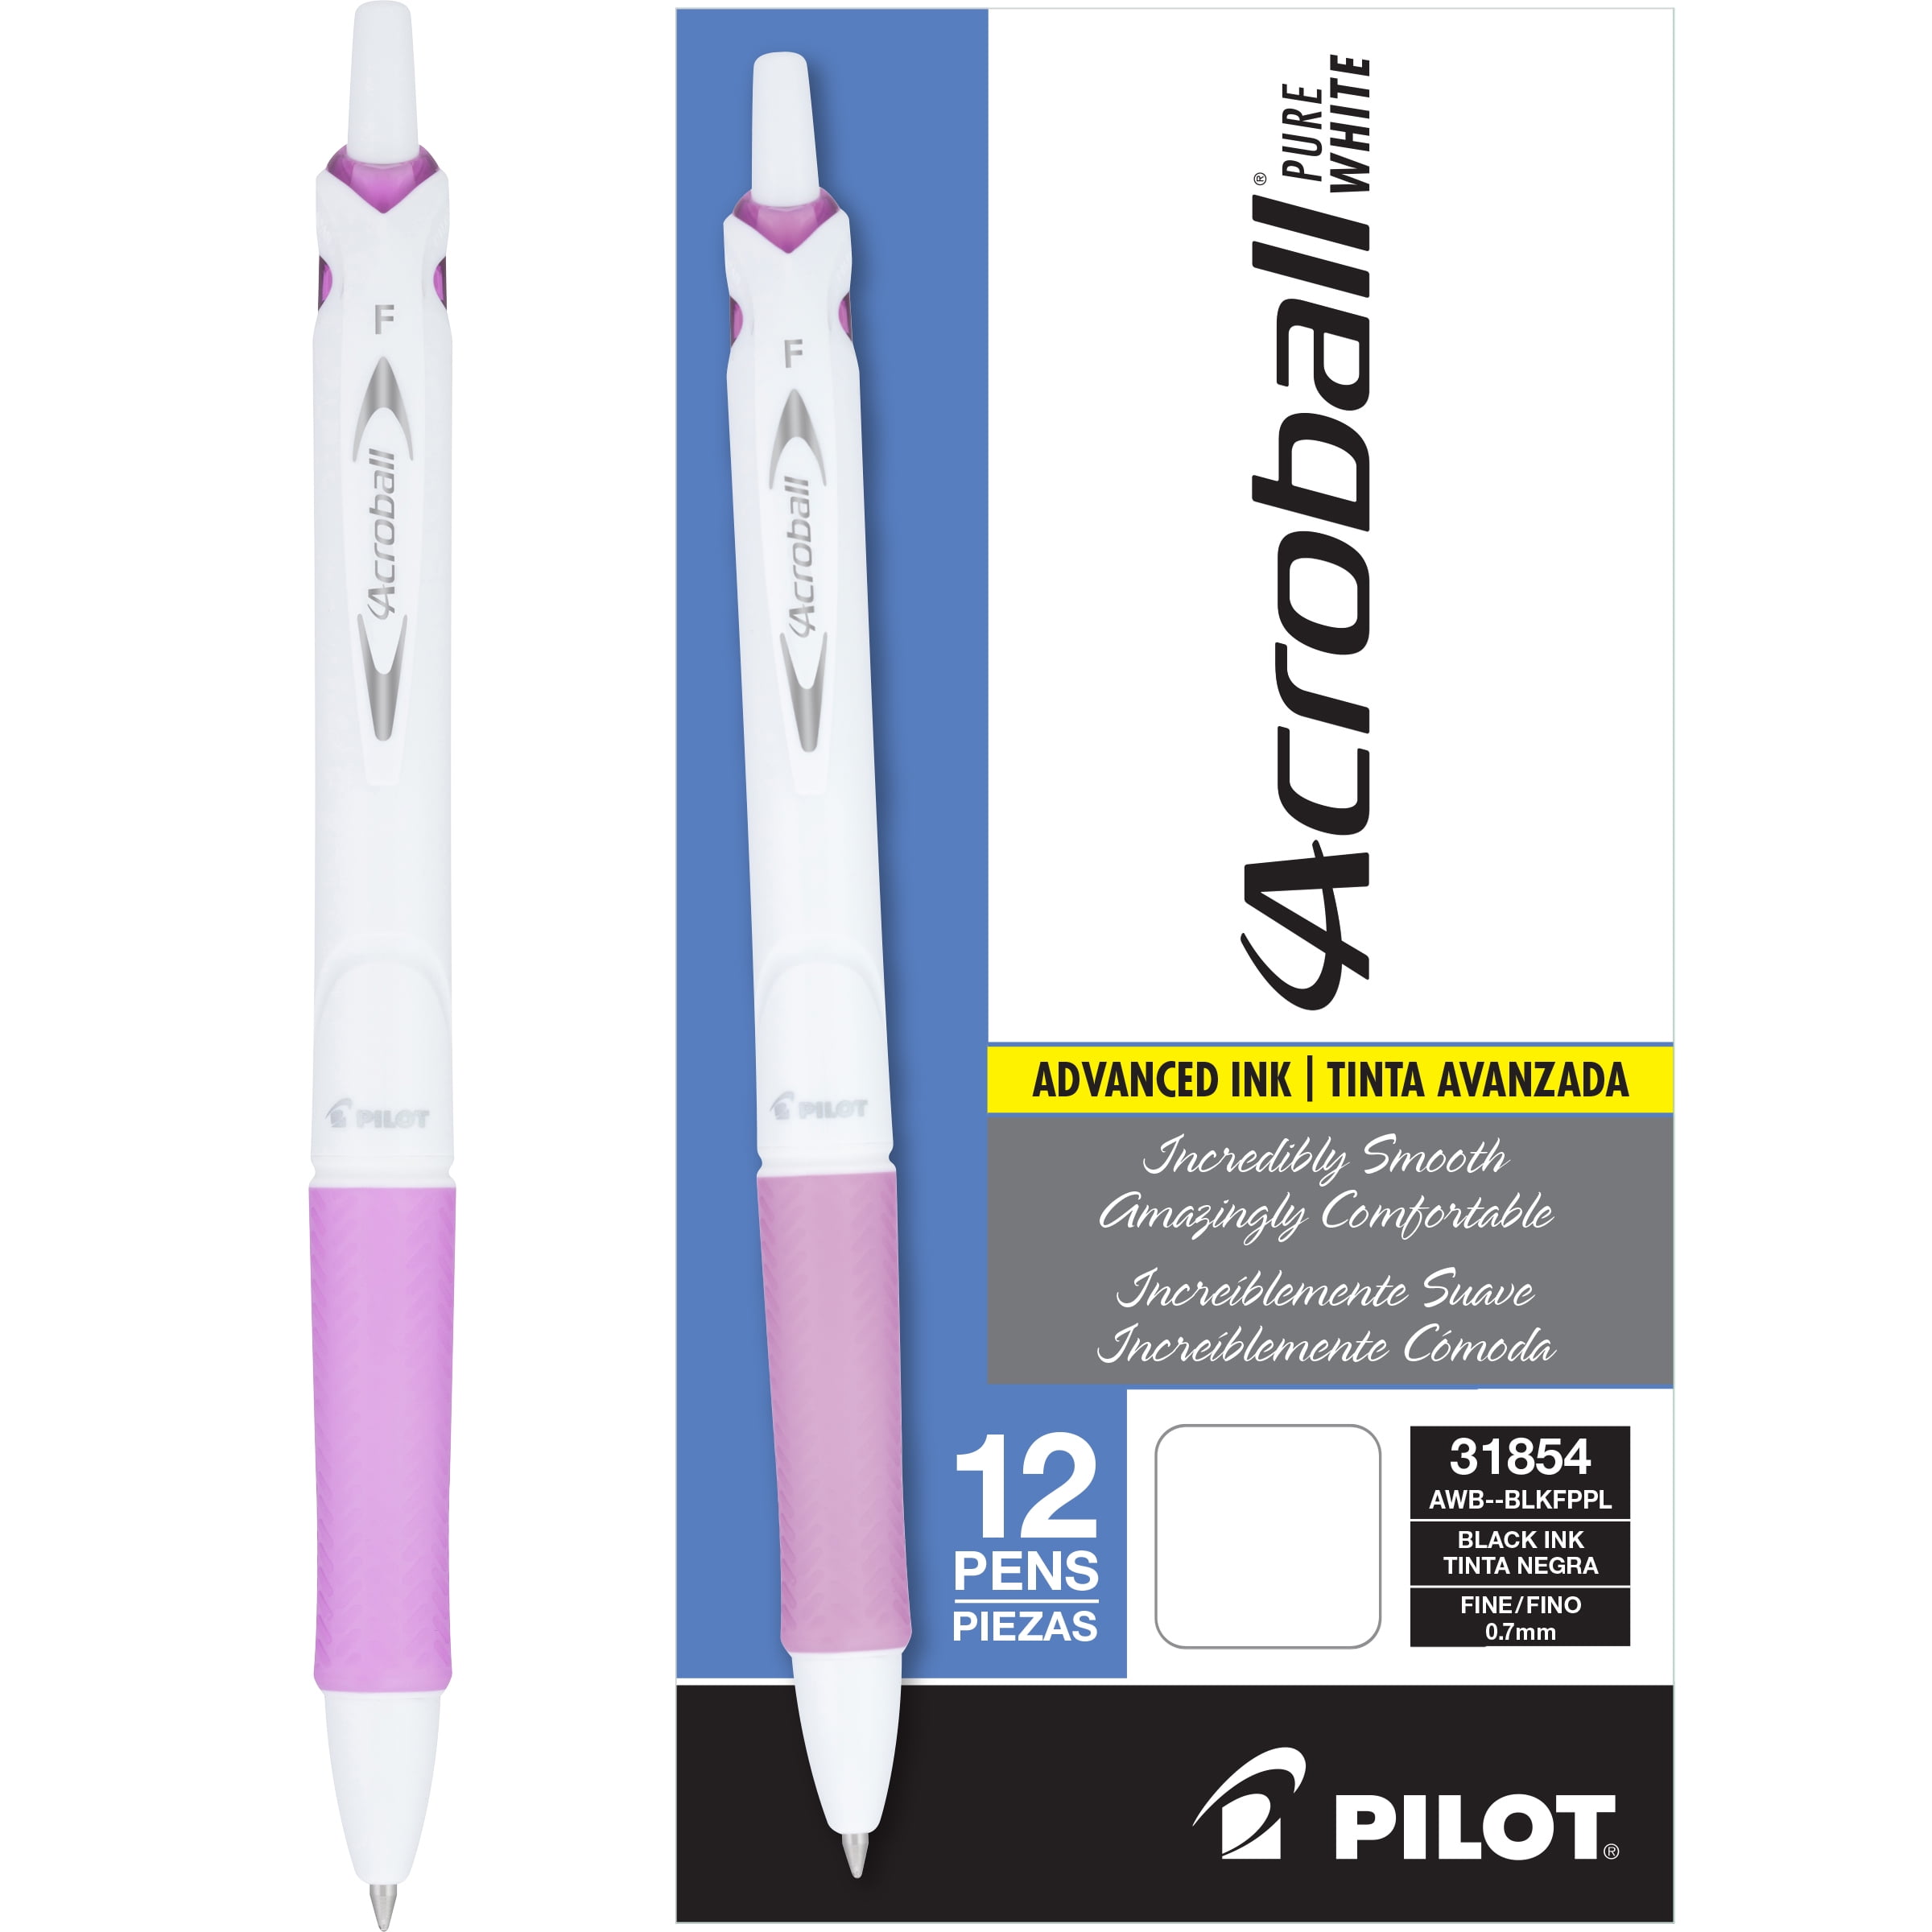 Fine Point 3 Pens Black Ink- 1 Pack PILOT Acroball PureWhite Advanced Ink Refillable & Retractable Ball Point Pens with Blue/Lime/Turquoise Accents 